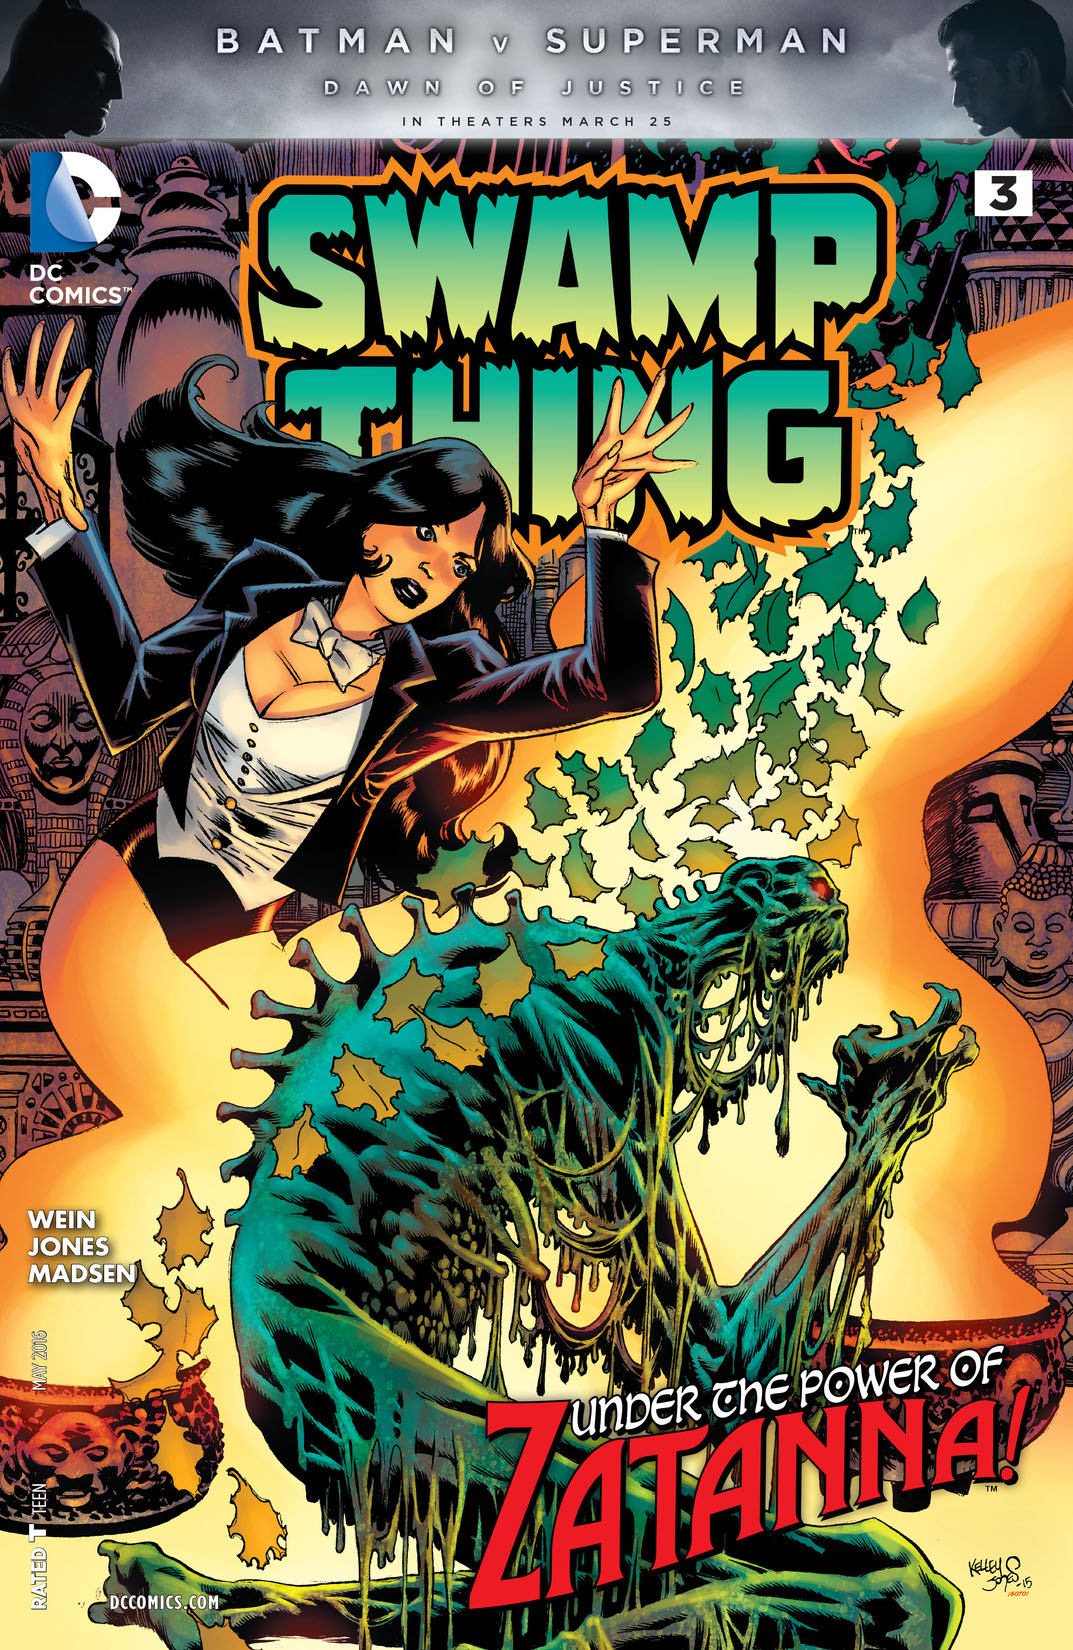 Swamp Thing (2016-) #3 preview images